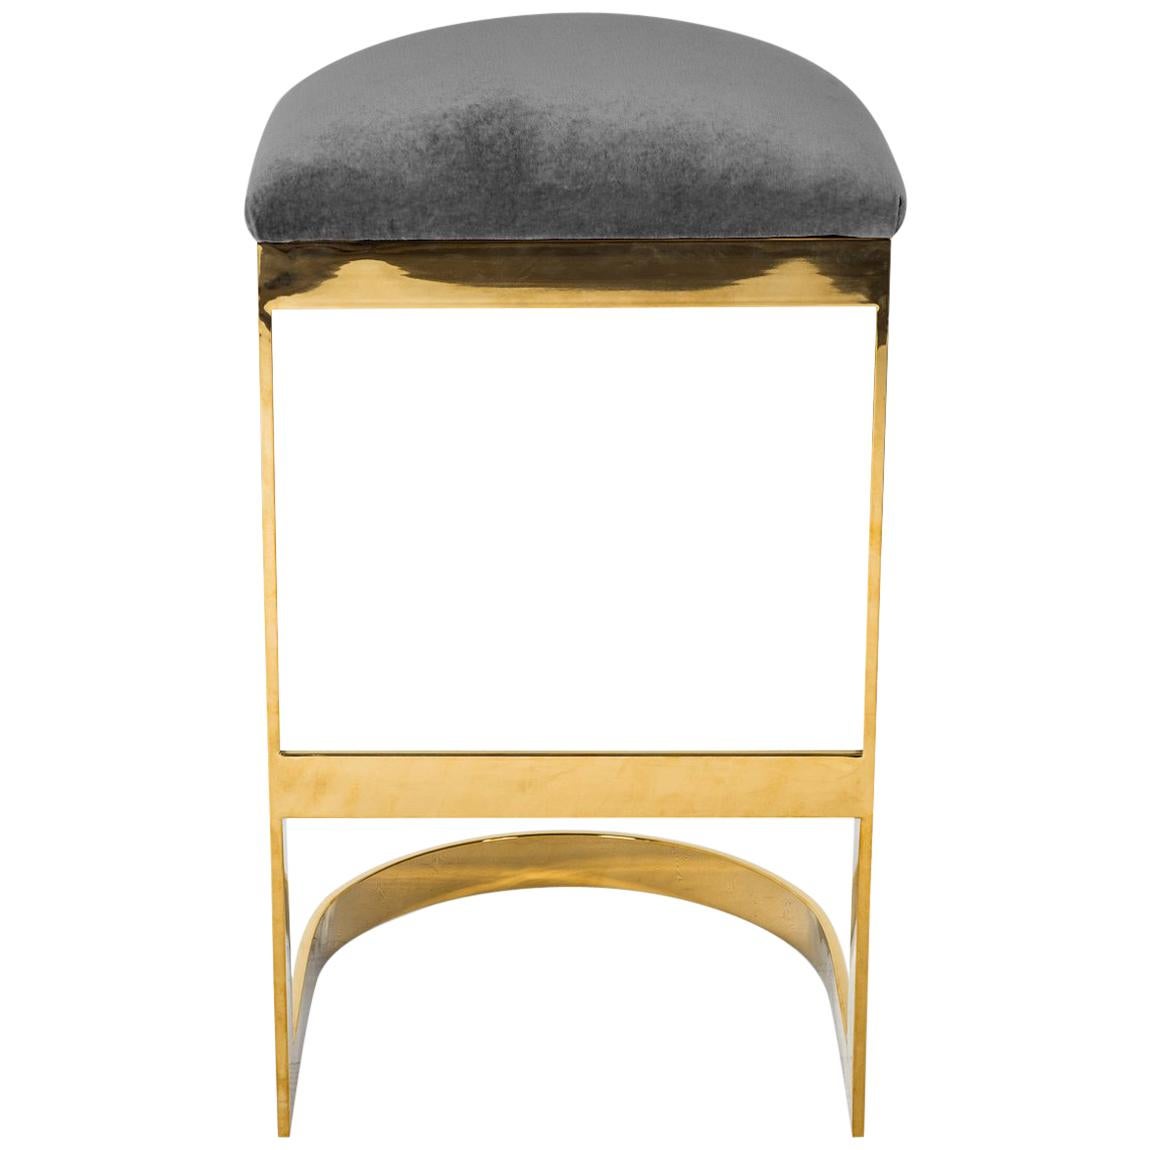 Modern Style Backless Counter Stool in Velvet with a Polished Solid Brass Frame